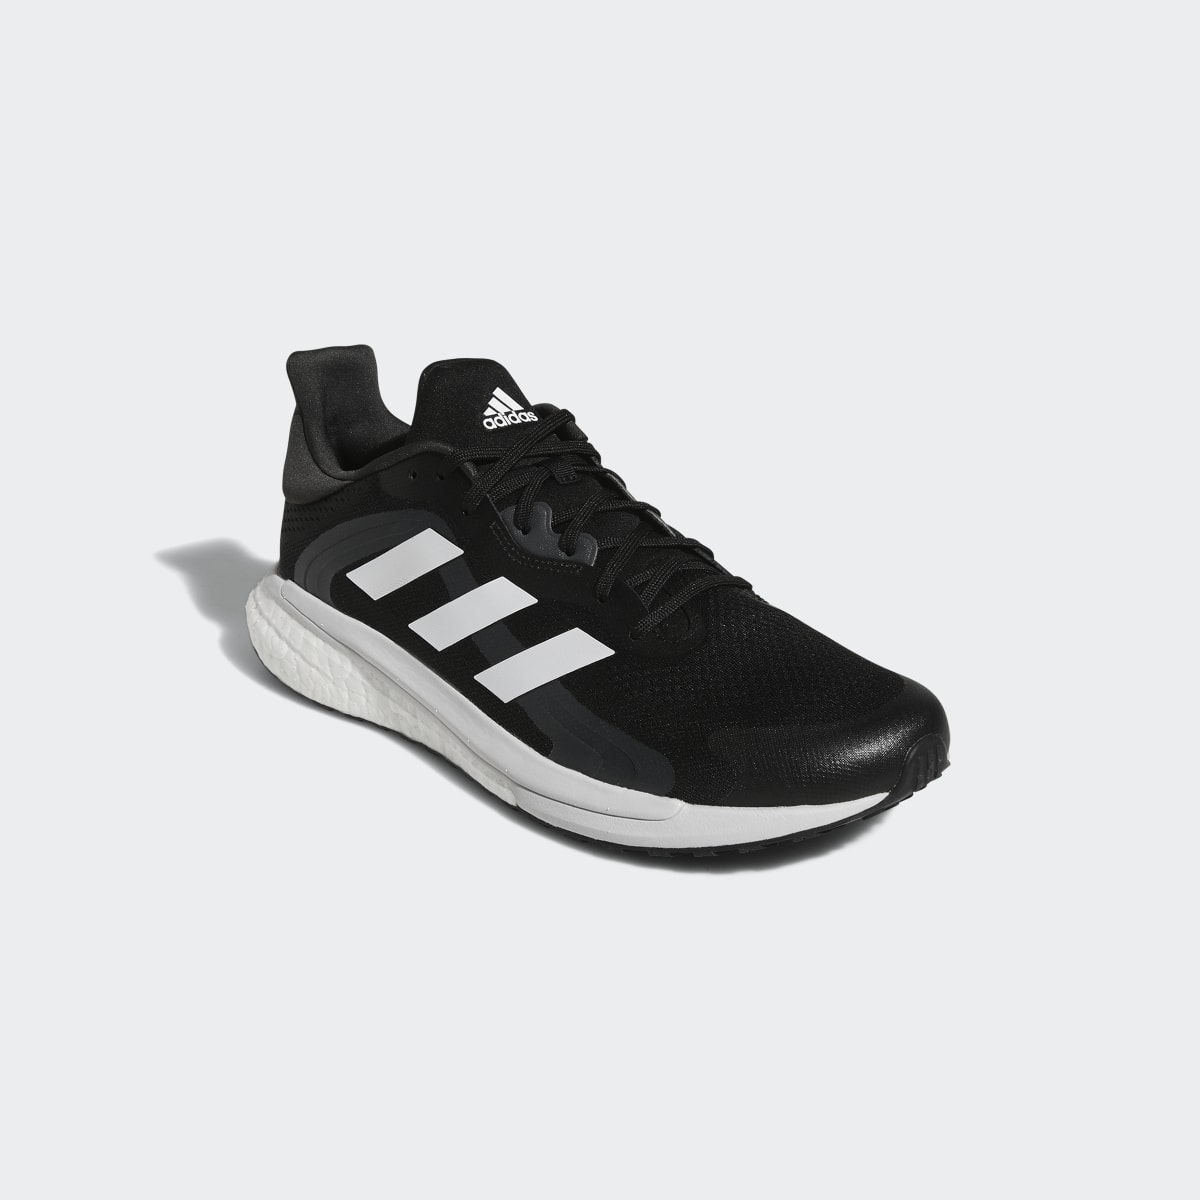 Adidas SolarGlide 4 ST Shoes. 13